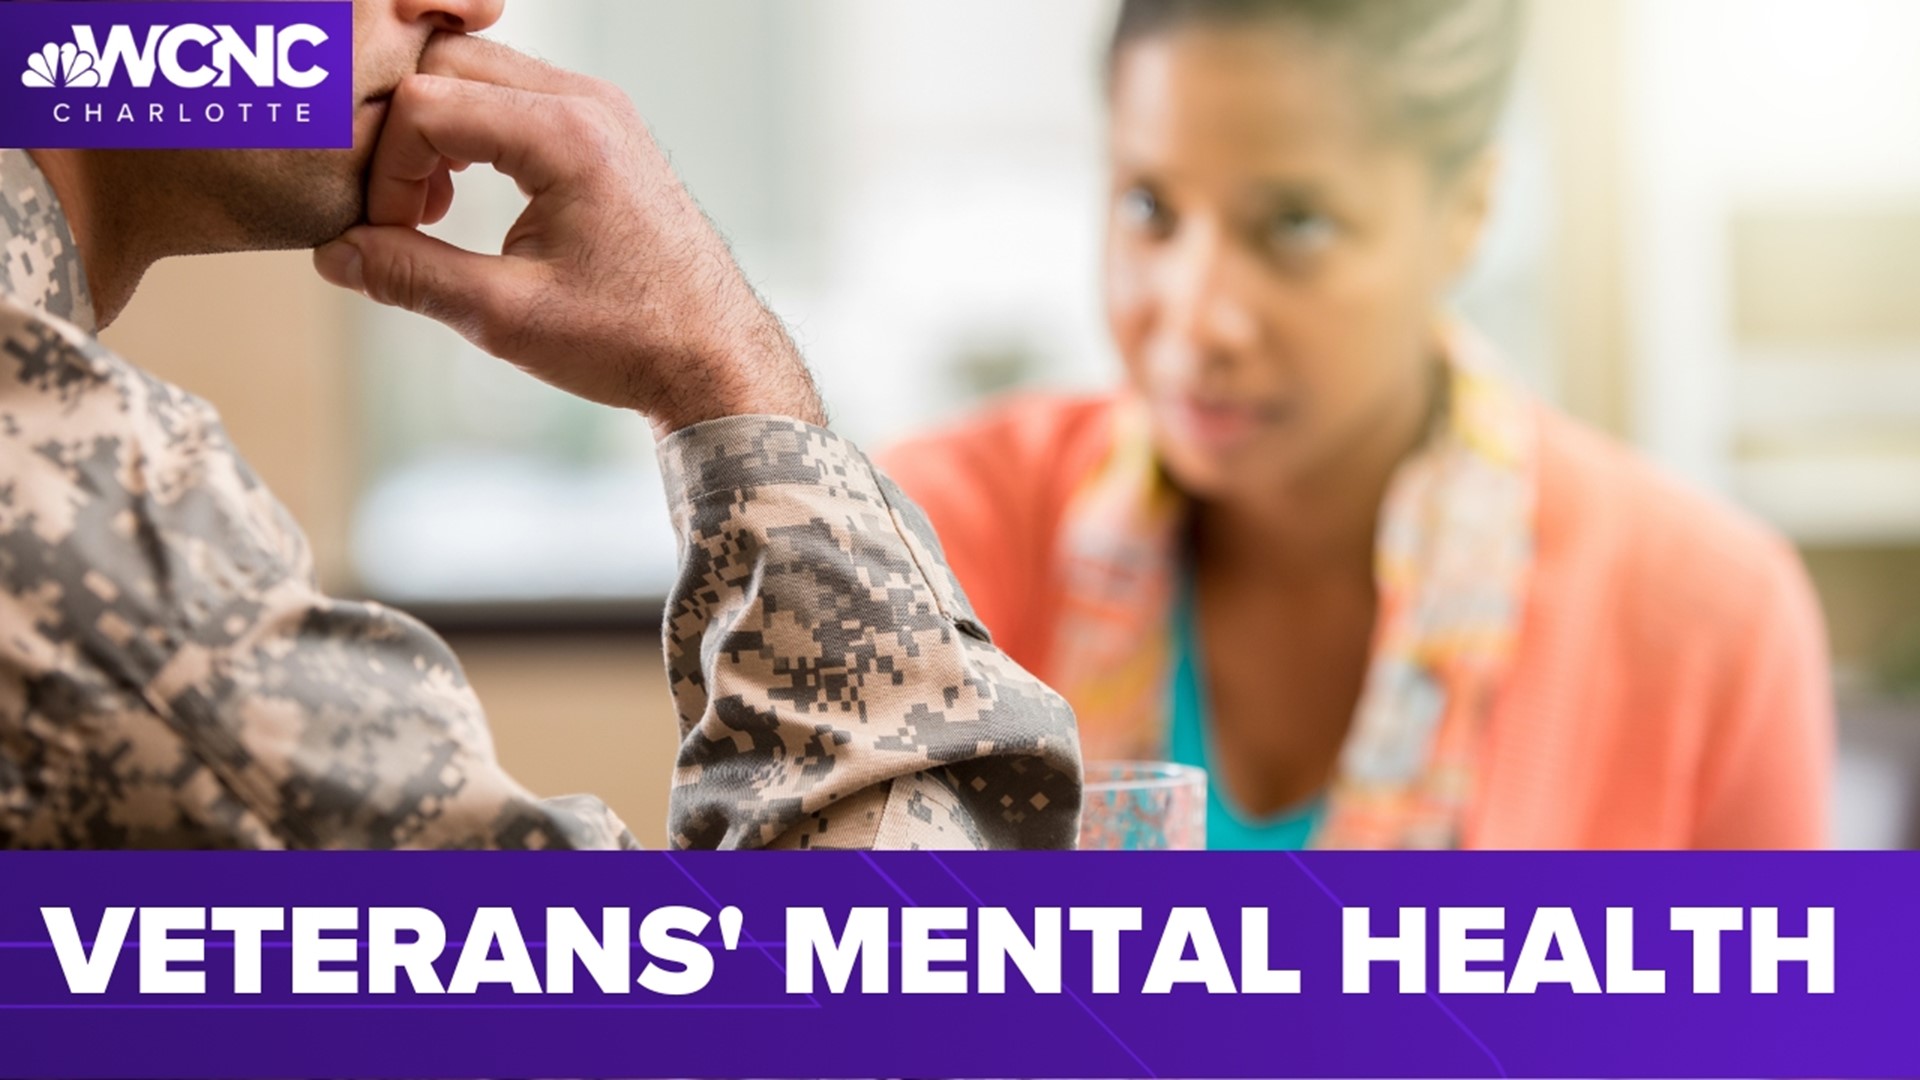 Chloe Leshner has a closer look at resources for veterans in need of help with their mental health.